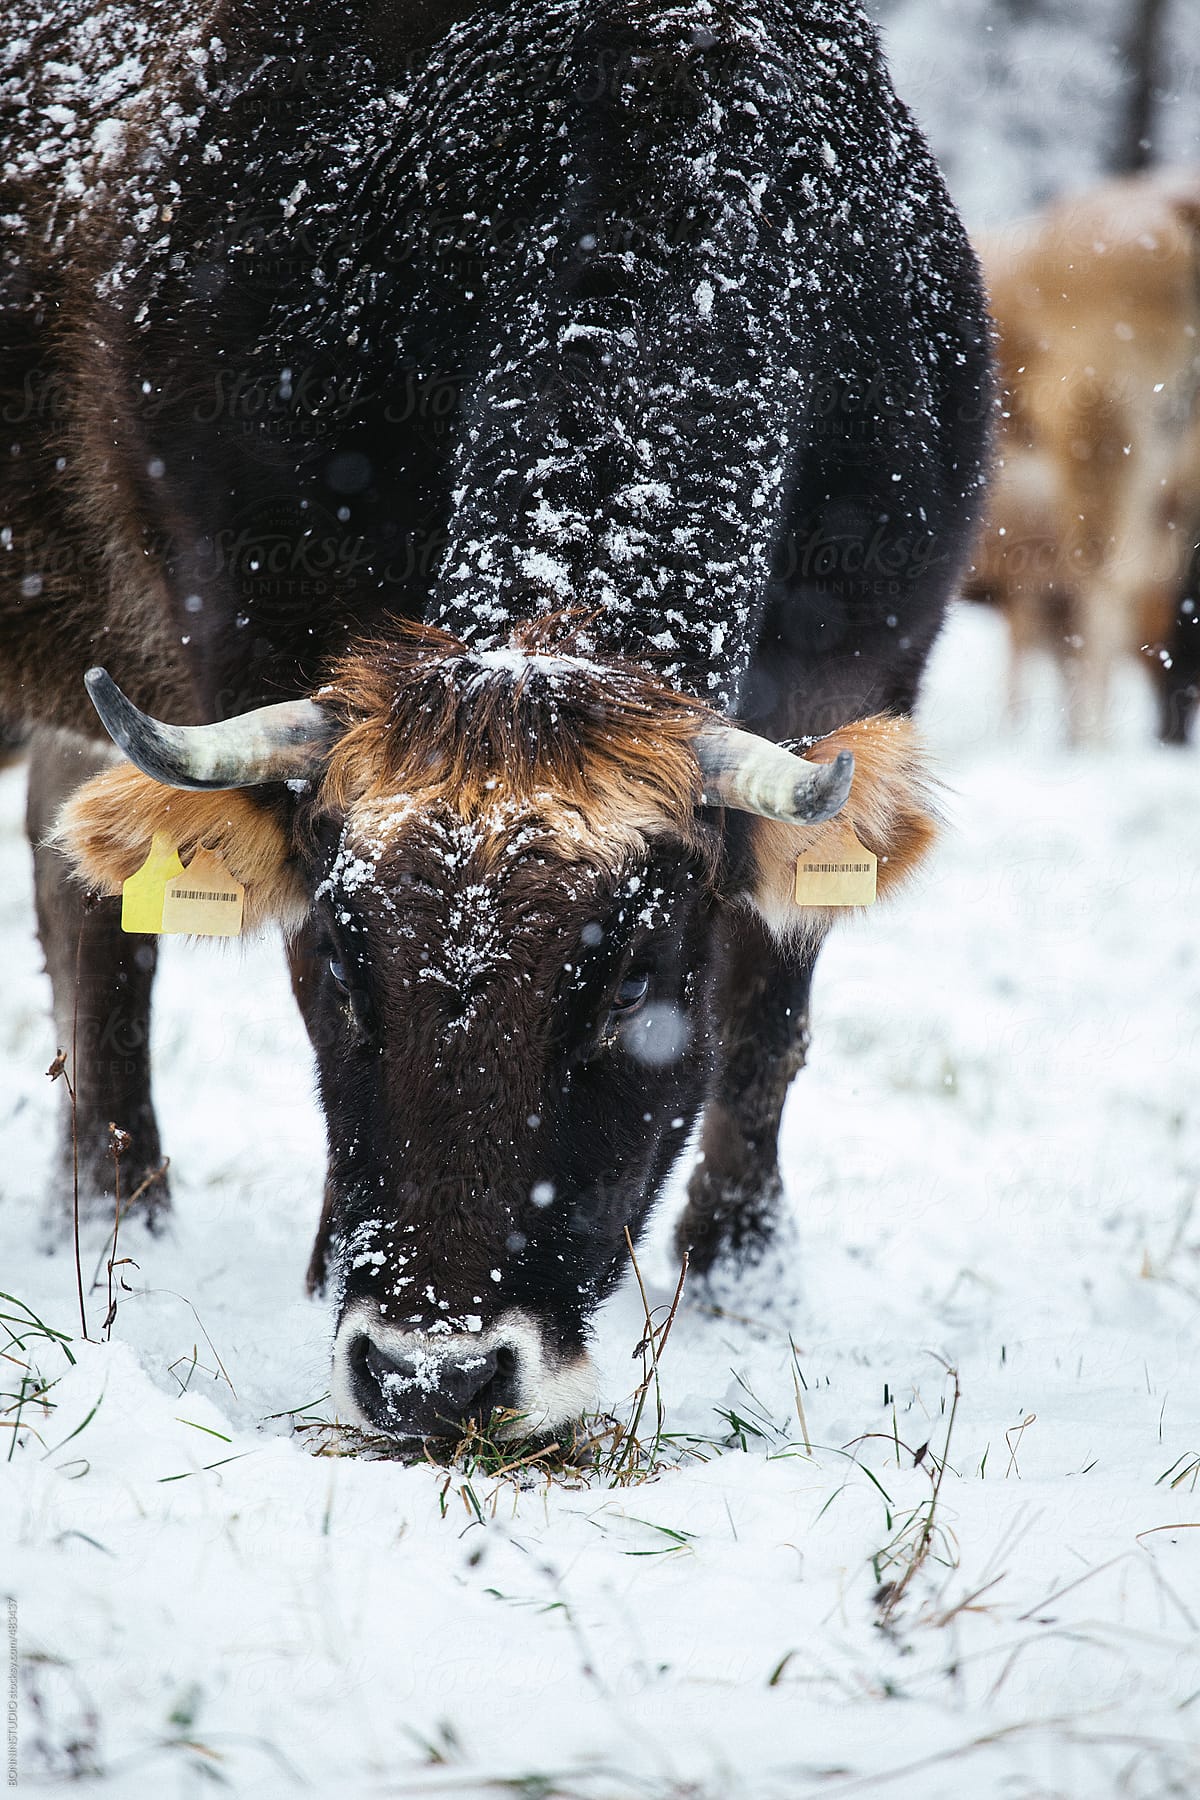 Big cows on a snowy forest.